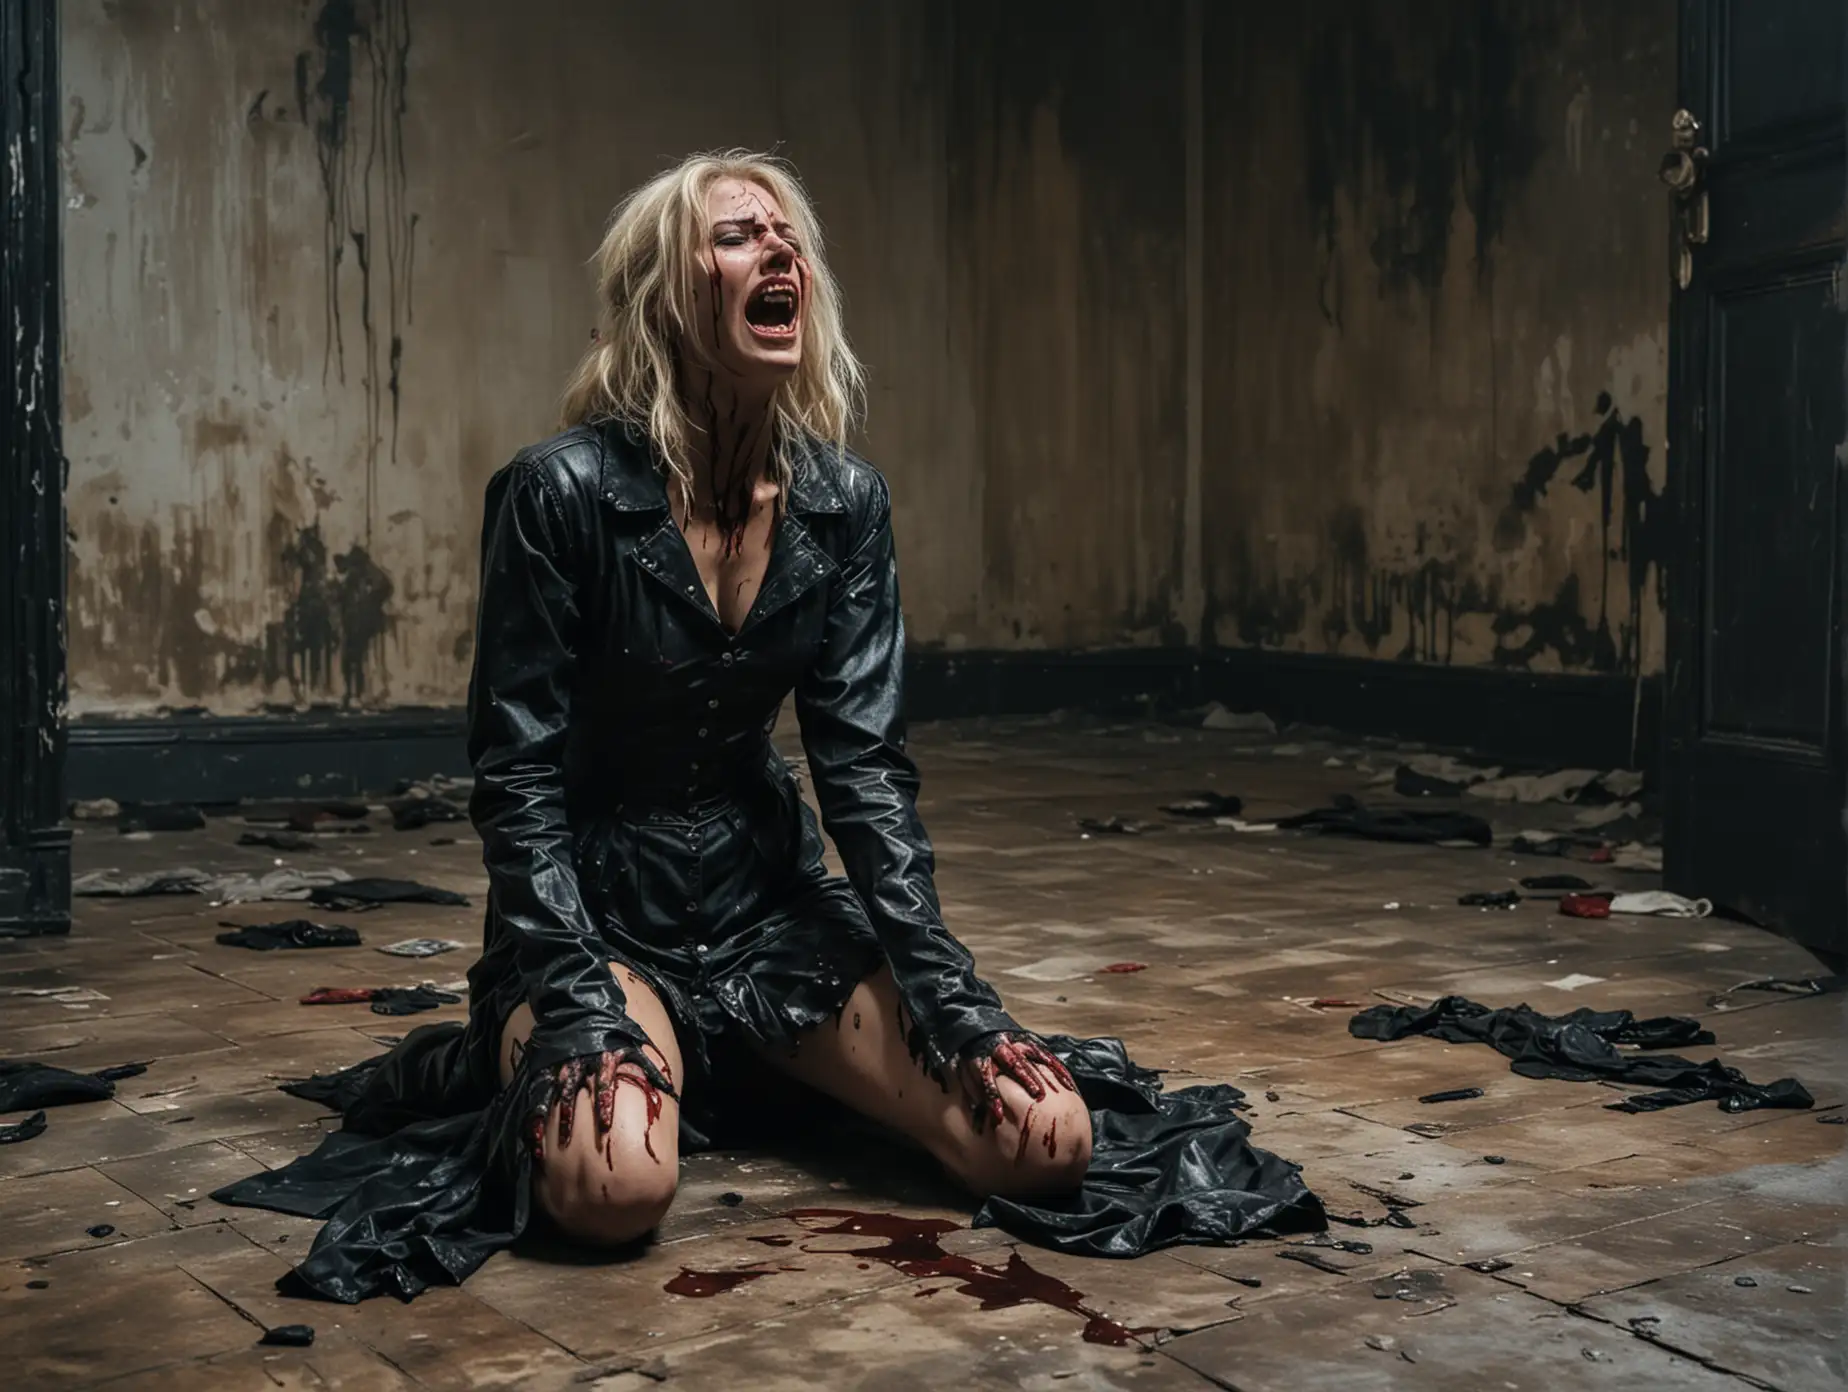 Distressed-Blonde-Woman-in-Bloodstained-Attire-Mourns-in-Abandoned-Interior